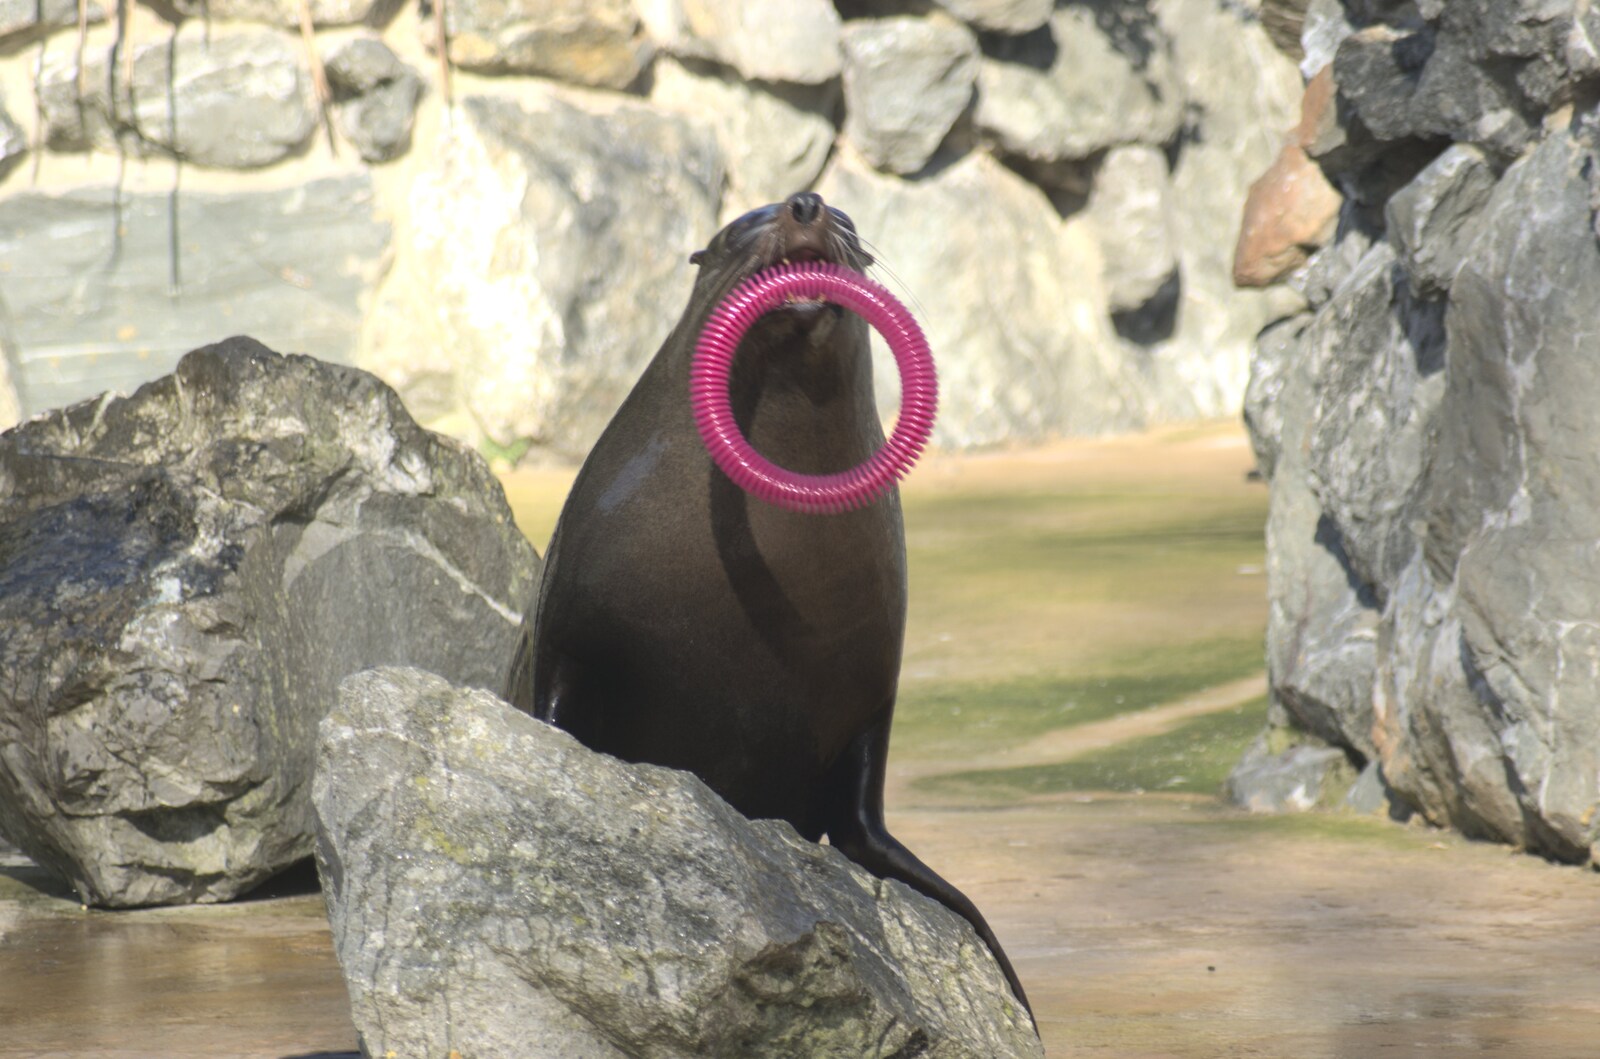 A sealion with a plastic ring toy from A Day At Banham Zoo, Norfolk - 7th March 2011